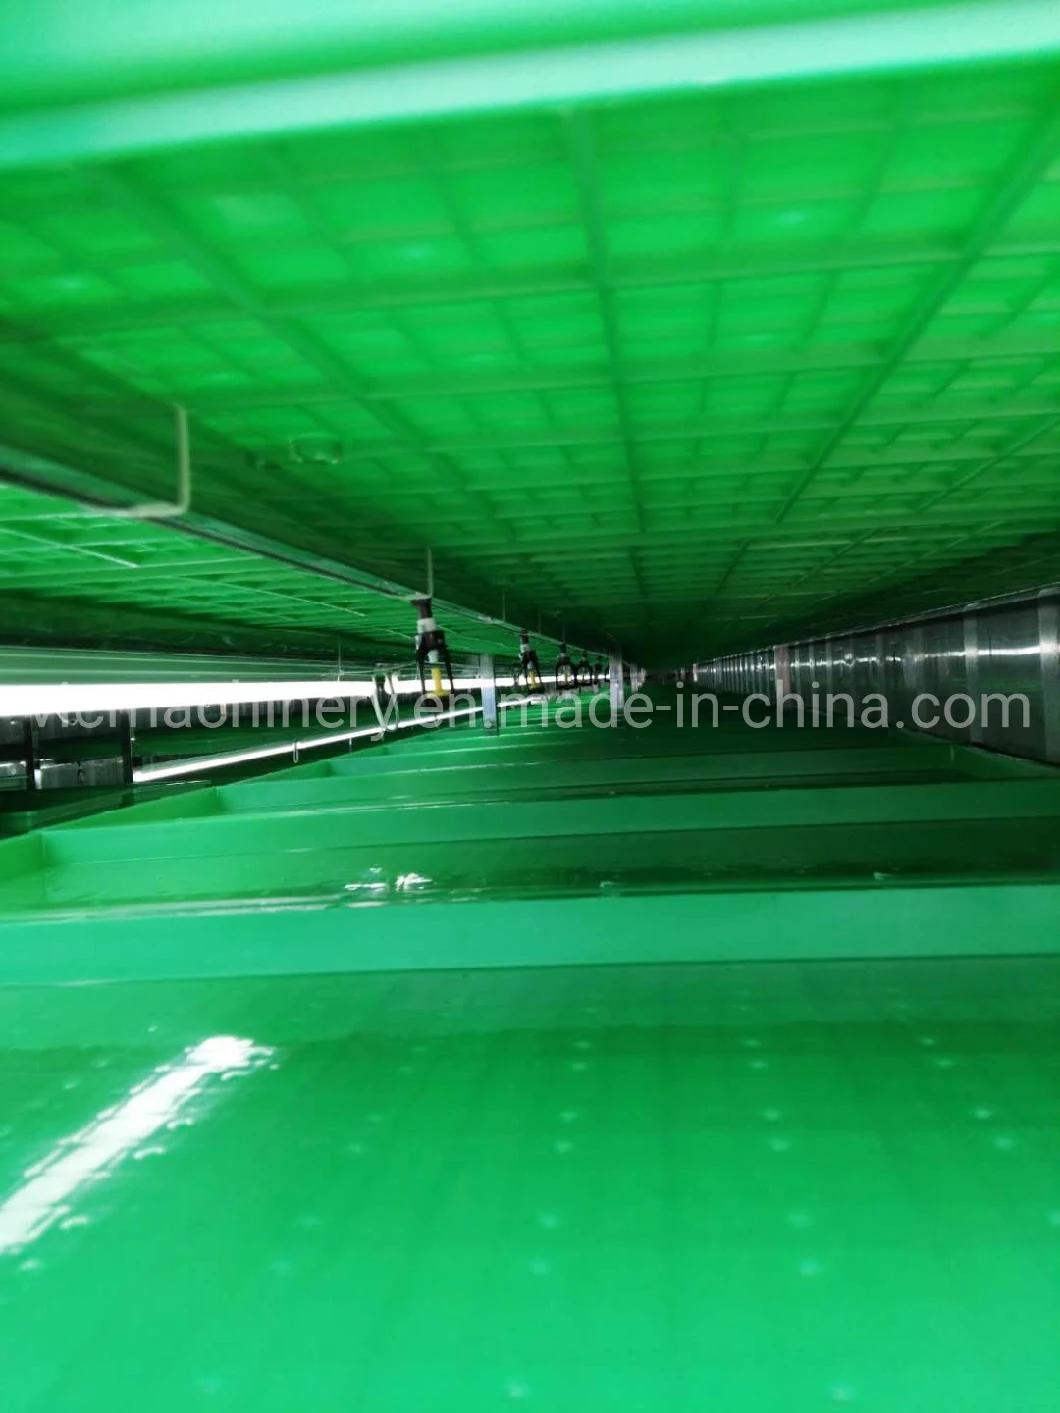 Hydroponic Farm Equipment With Offering Fodder